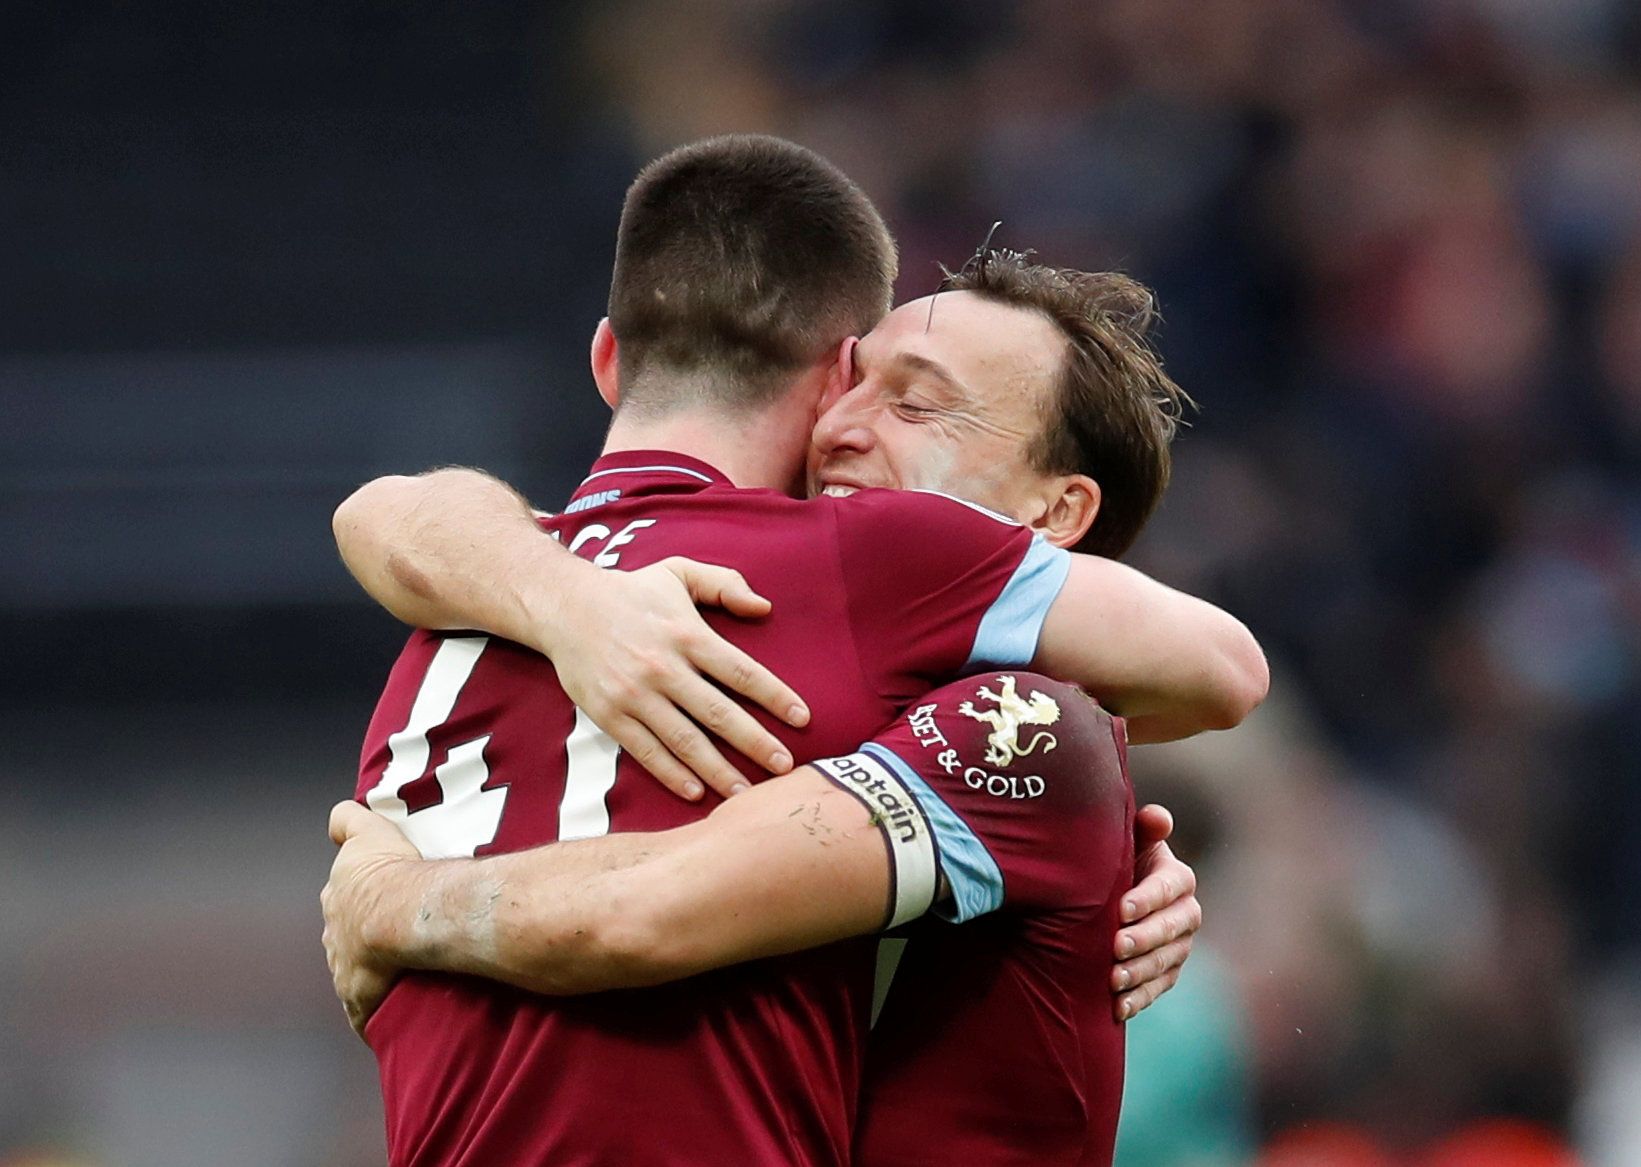 Soccer Football - Premier League - West Ham United v Arsenal - London Stadium, London, Britain - January 12, 2019  West Ham's Declan Rice celebrates after the match with Mark Noble                     REUTERS/David Klein  EDITORIAL USE ONLY. No use with unauthorized audio, video, data, fixture lists, club/league logos or "live" services. Online in-match use limited to 75 images, no video emulation. No use in betting, games or single club/league/player publications.  Please contact your account r